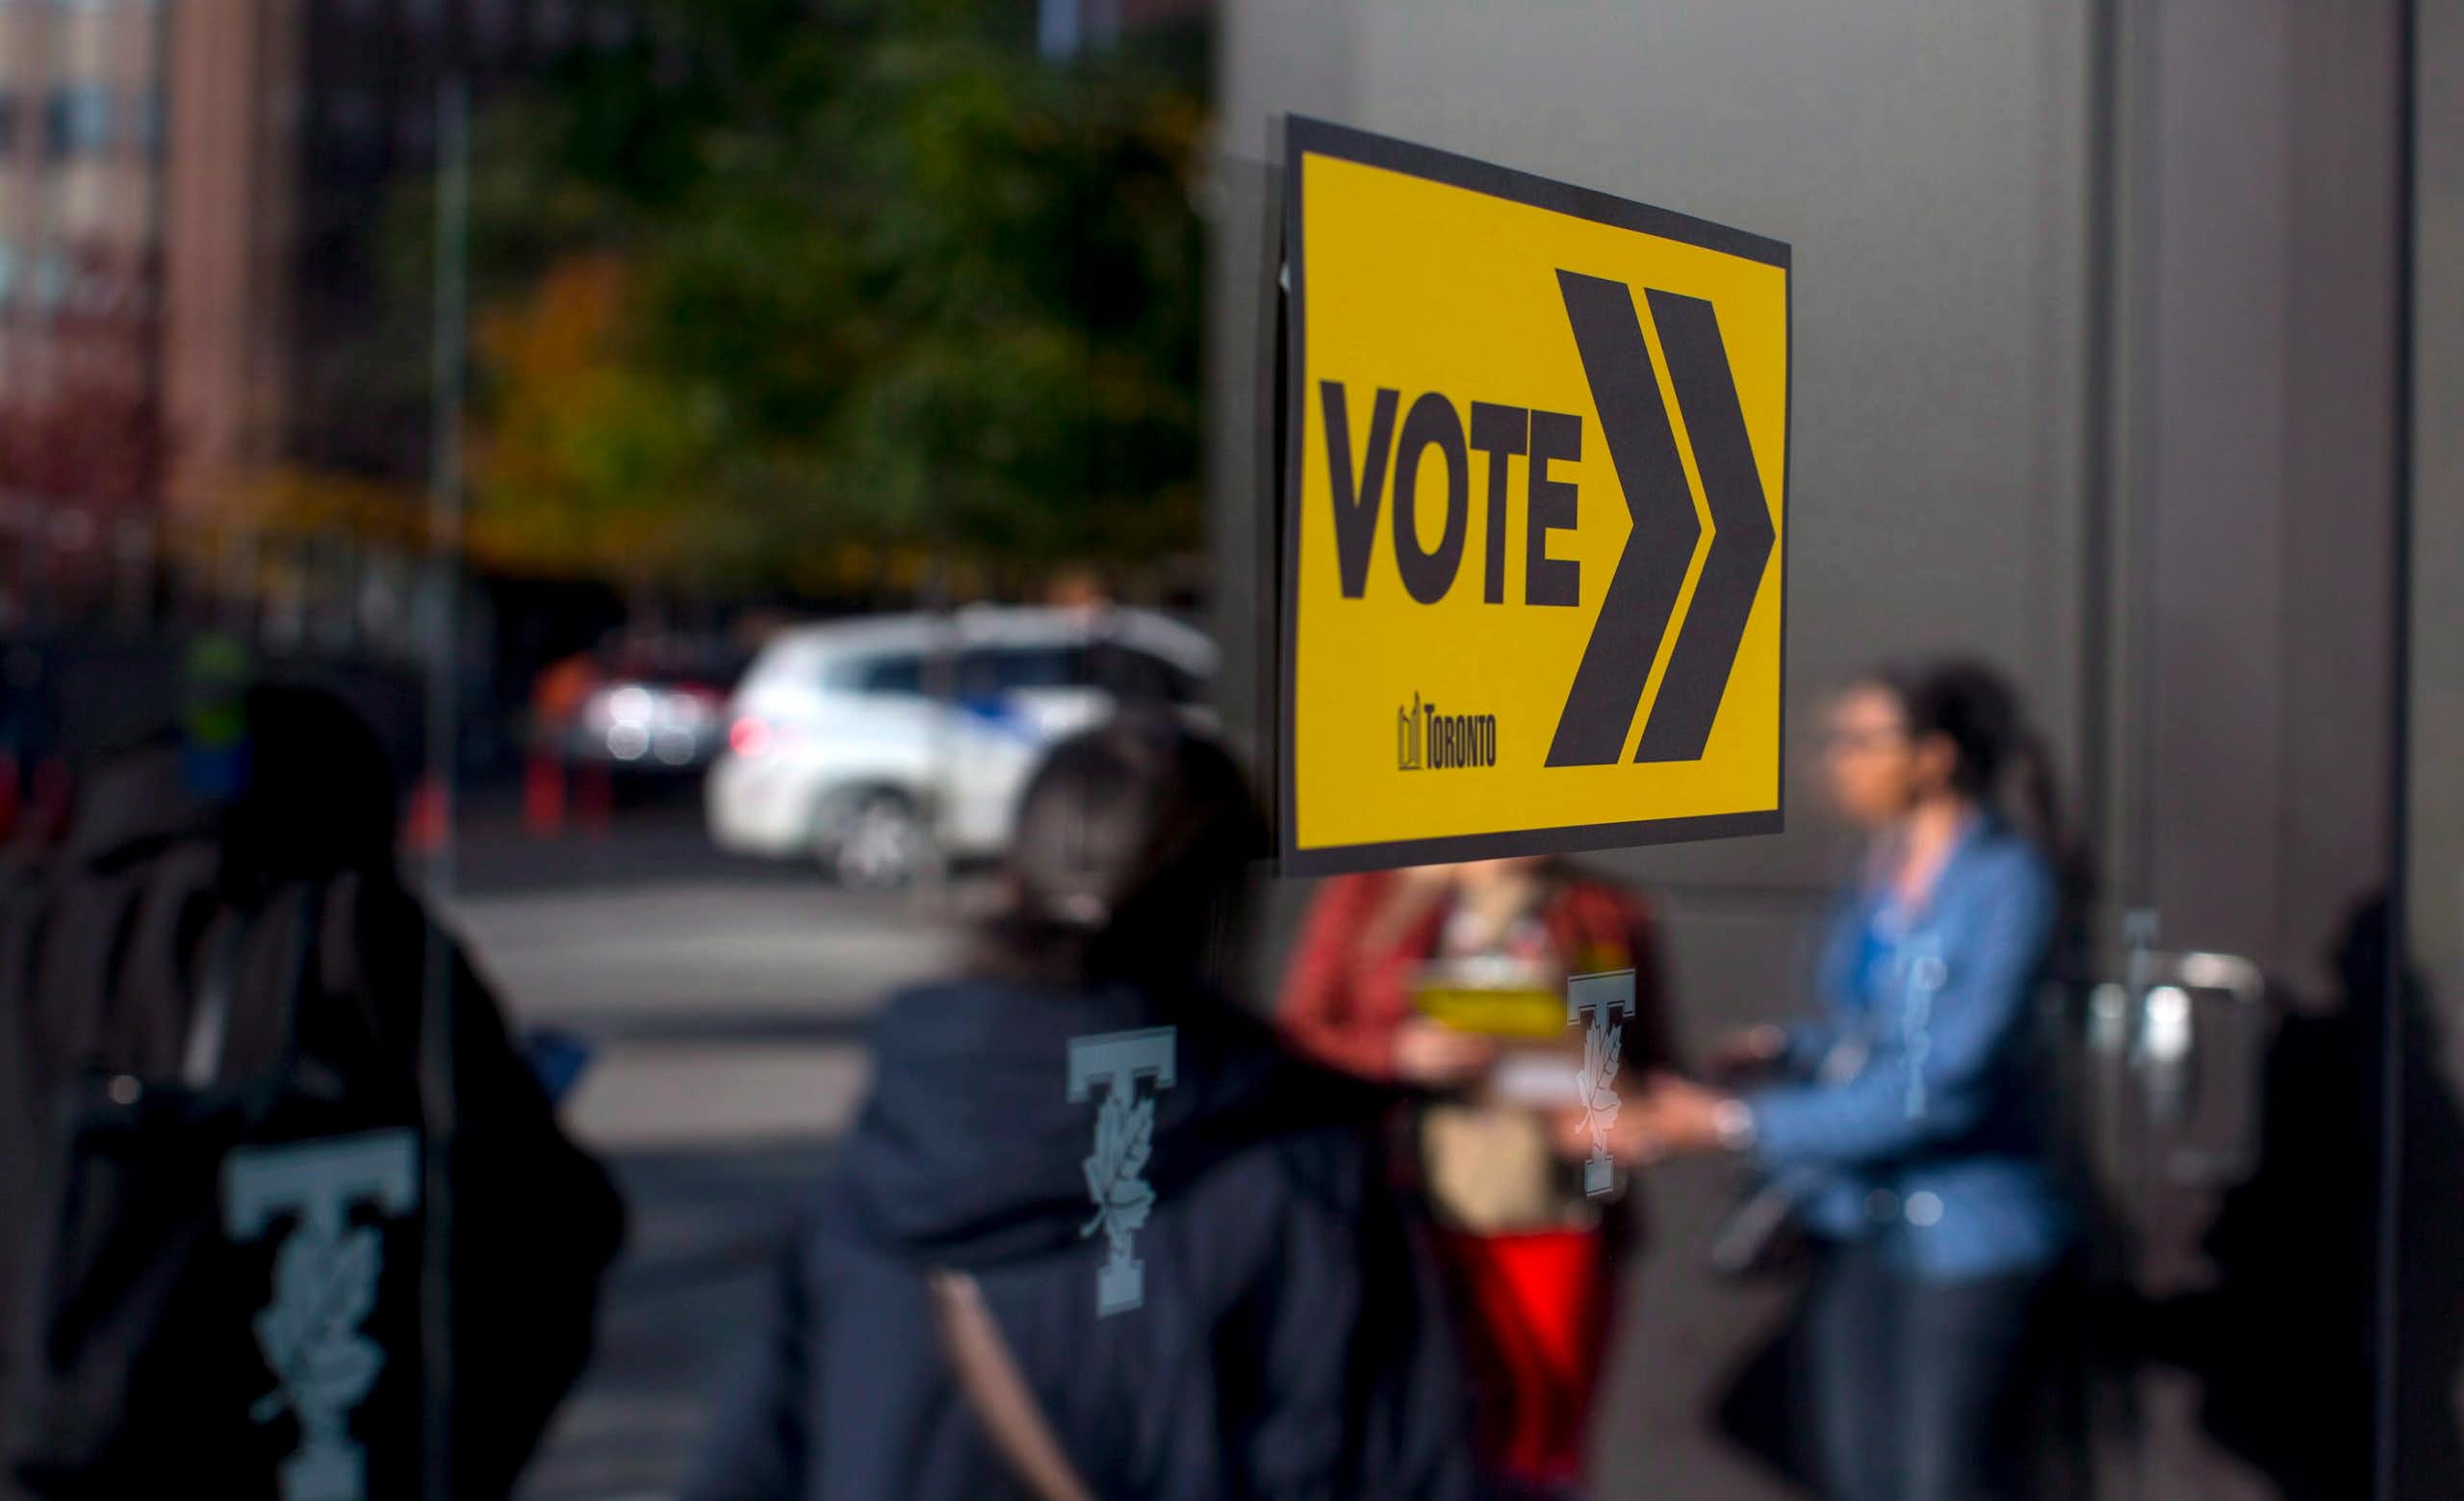 A yellow Vote sign is attached to glass; voters are reflected in the glass.